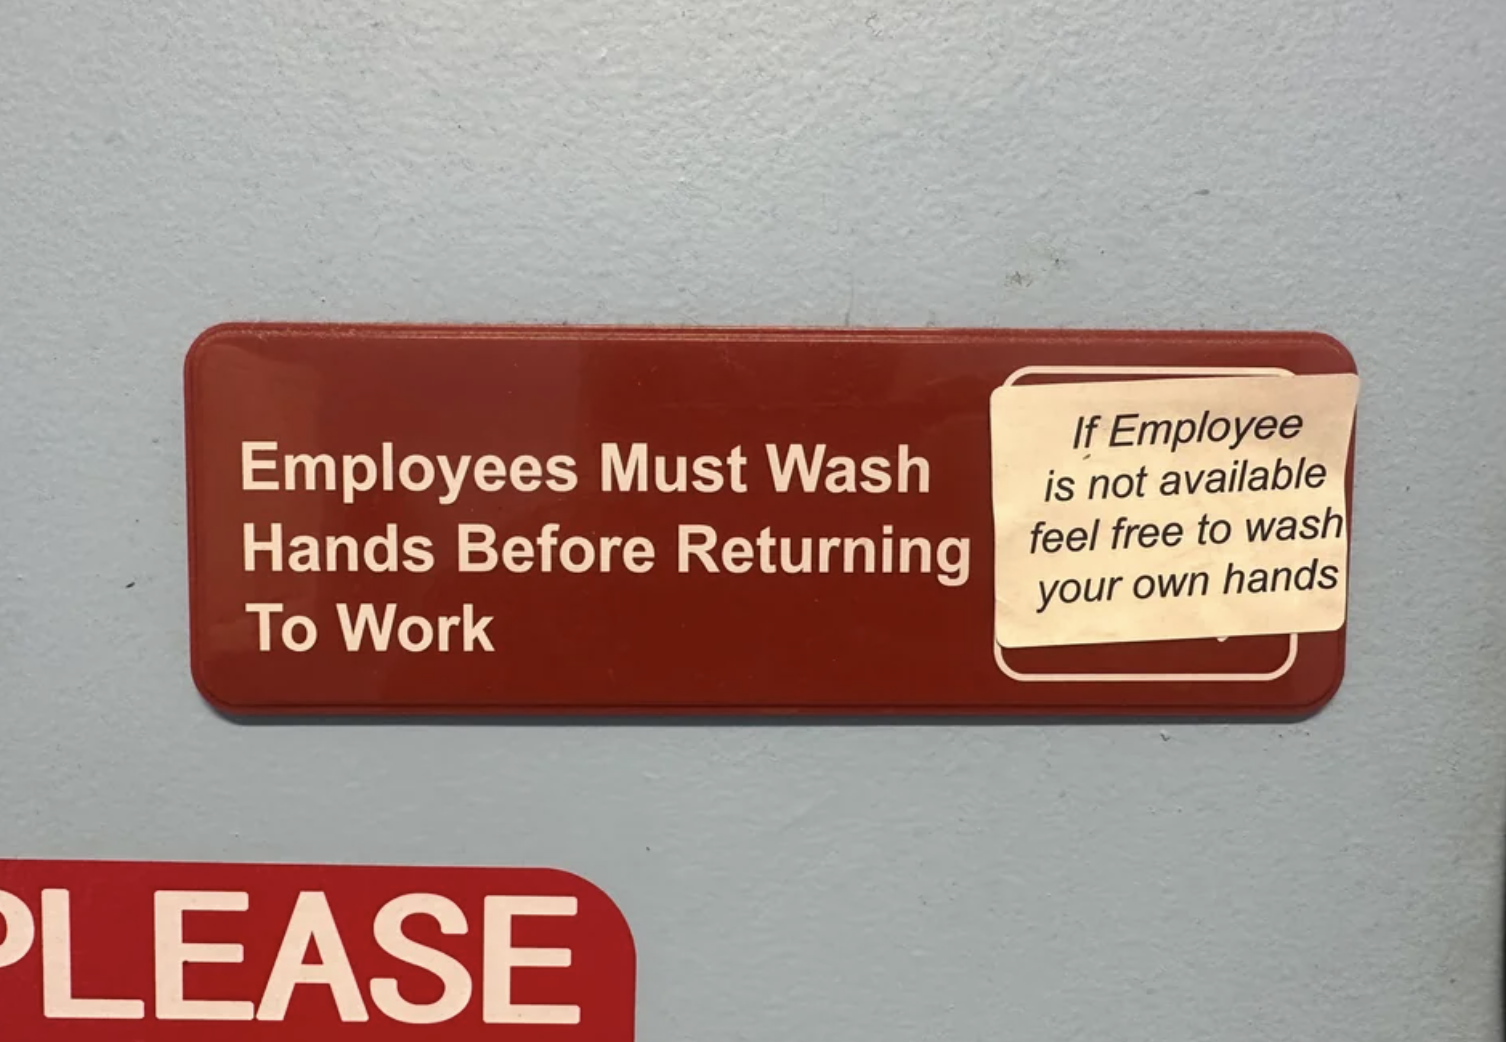 employees must wash hands before returning to work if employee is not available feel free to wash your own hands